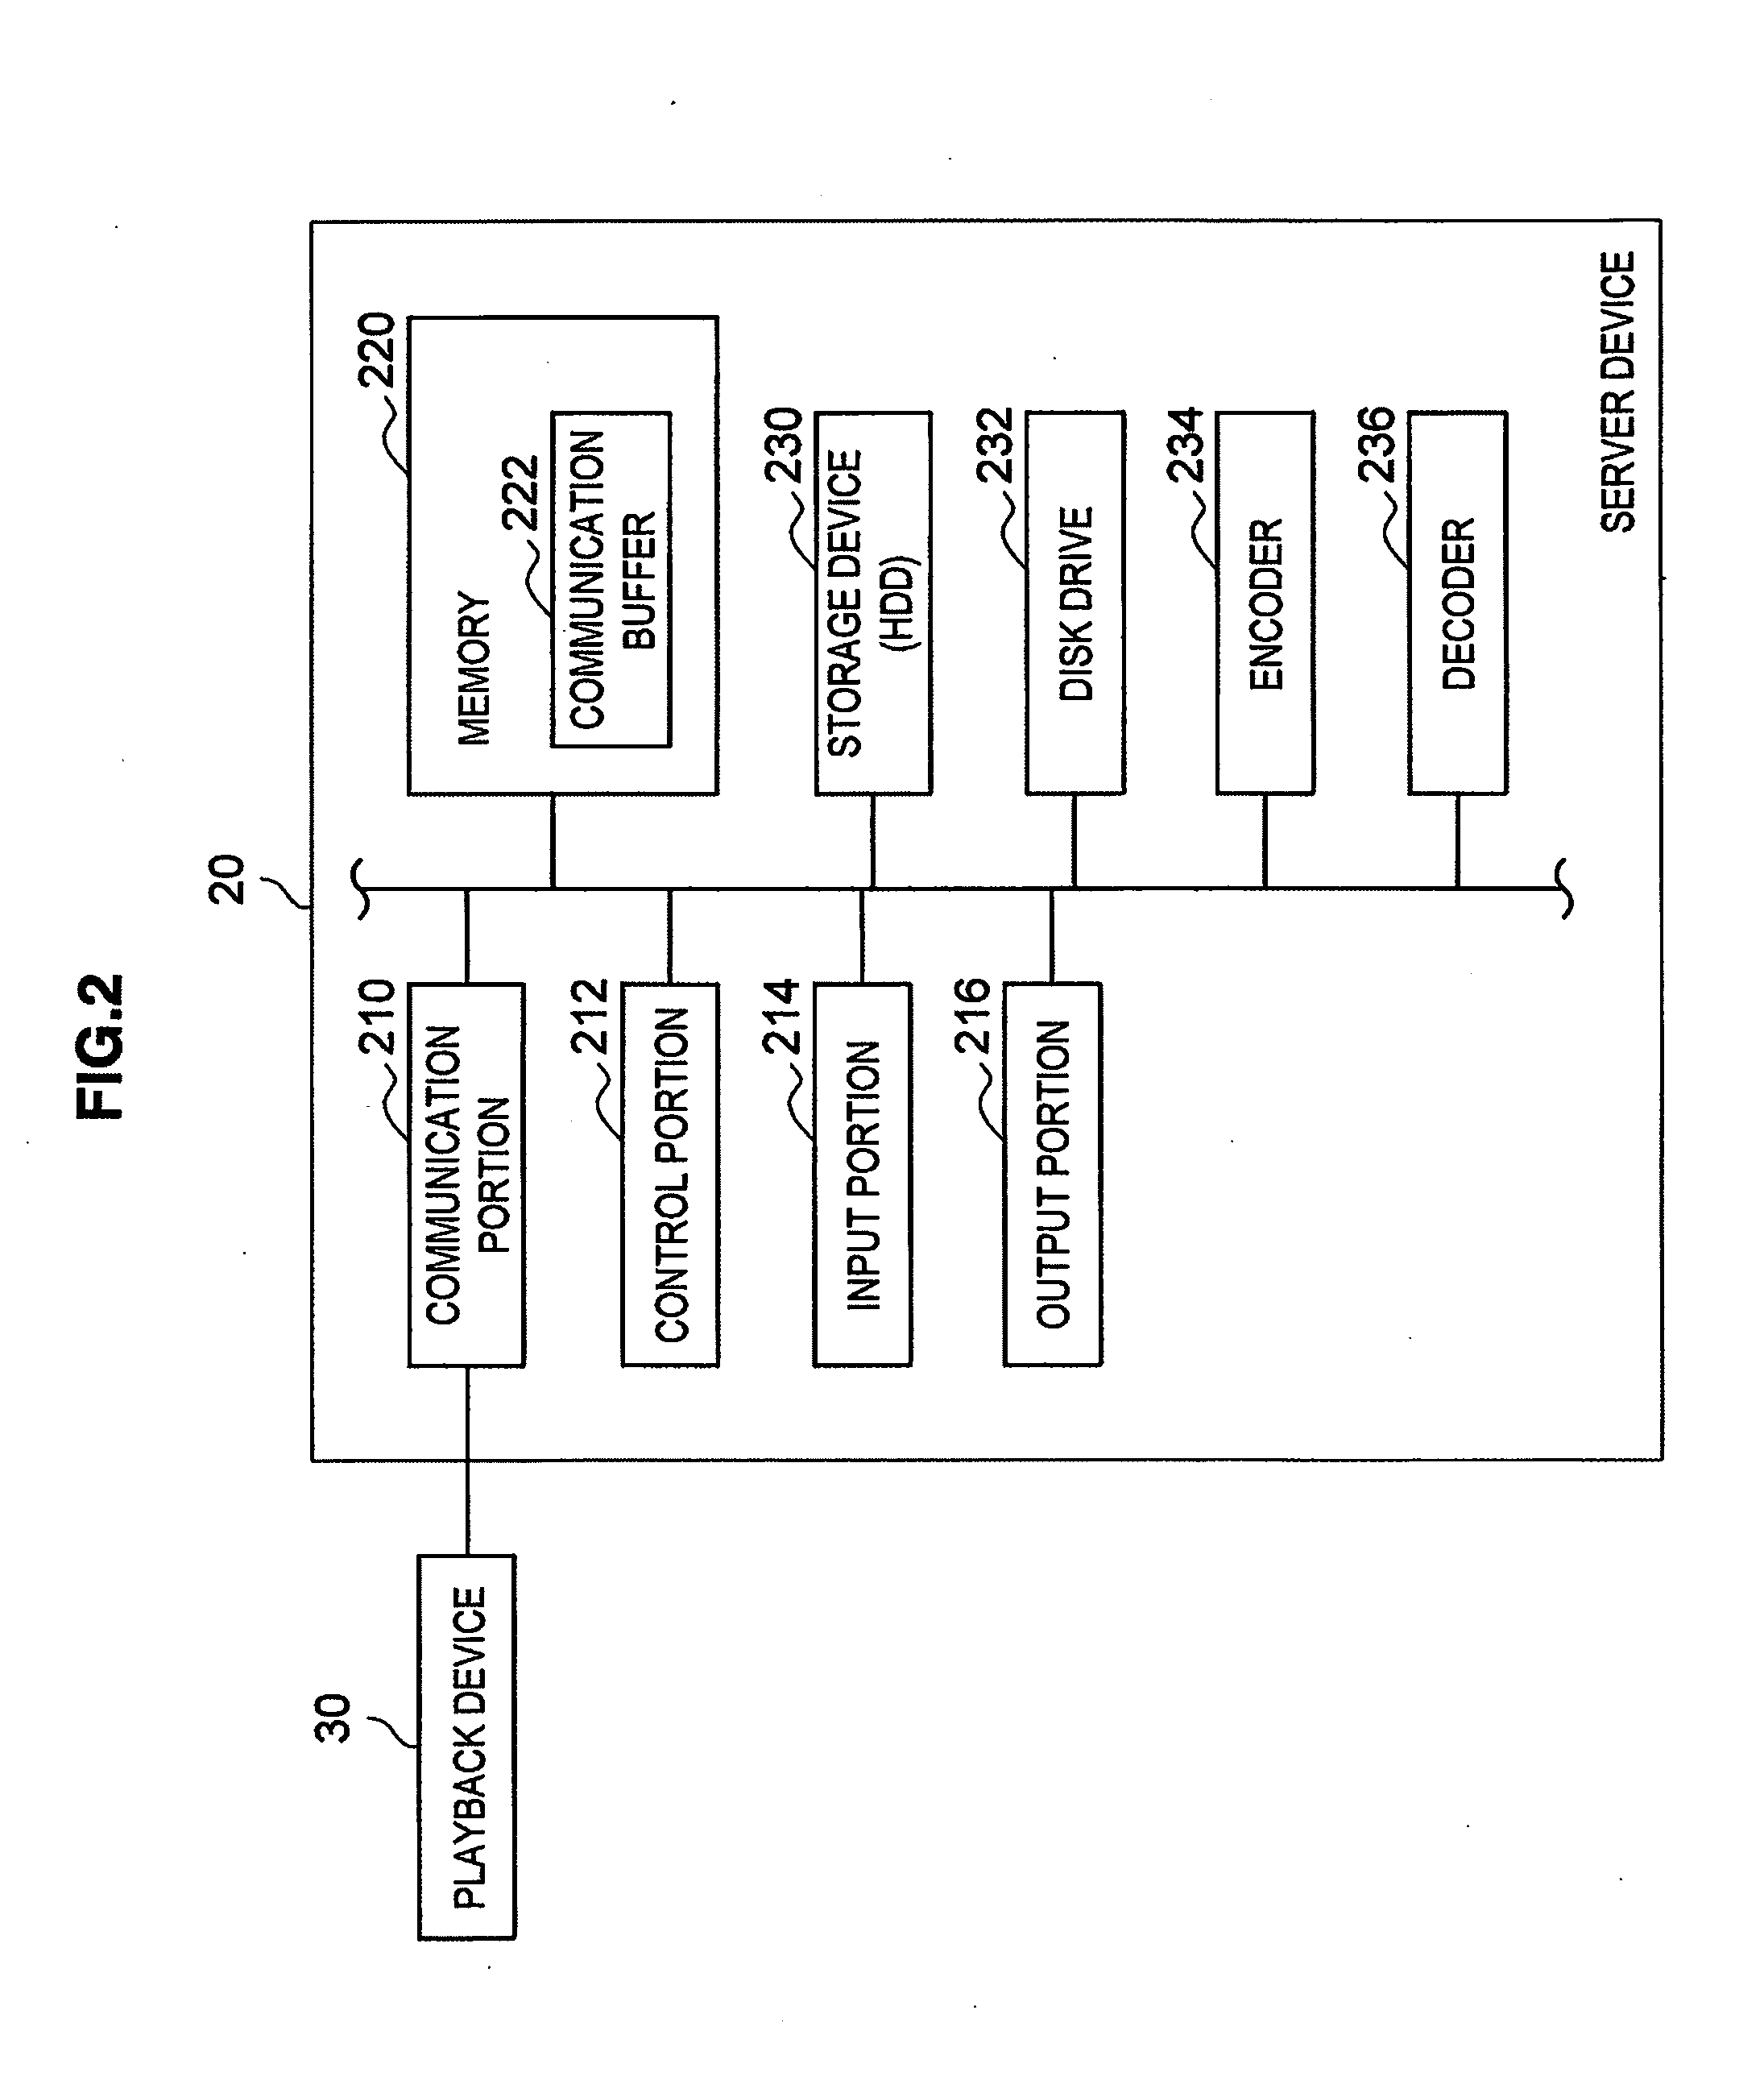 Content playback system, playback device, playback control method and program